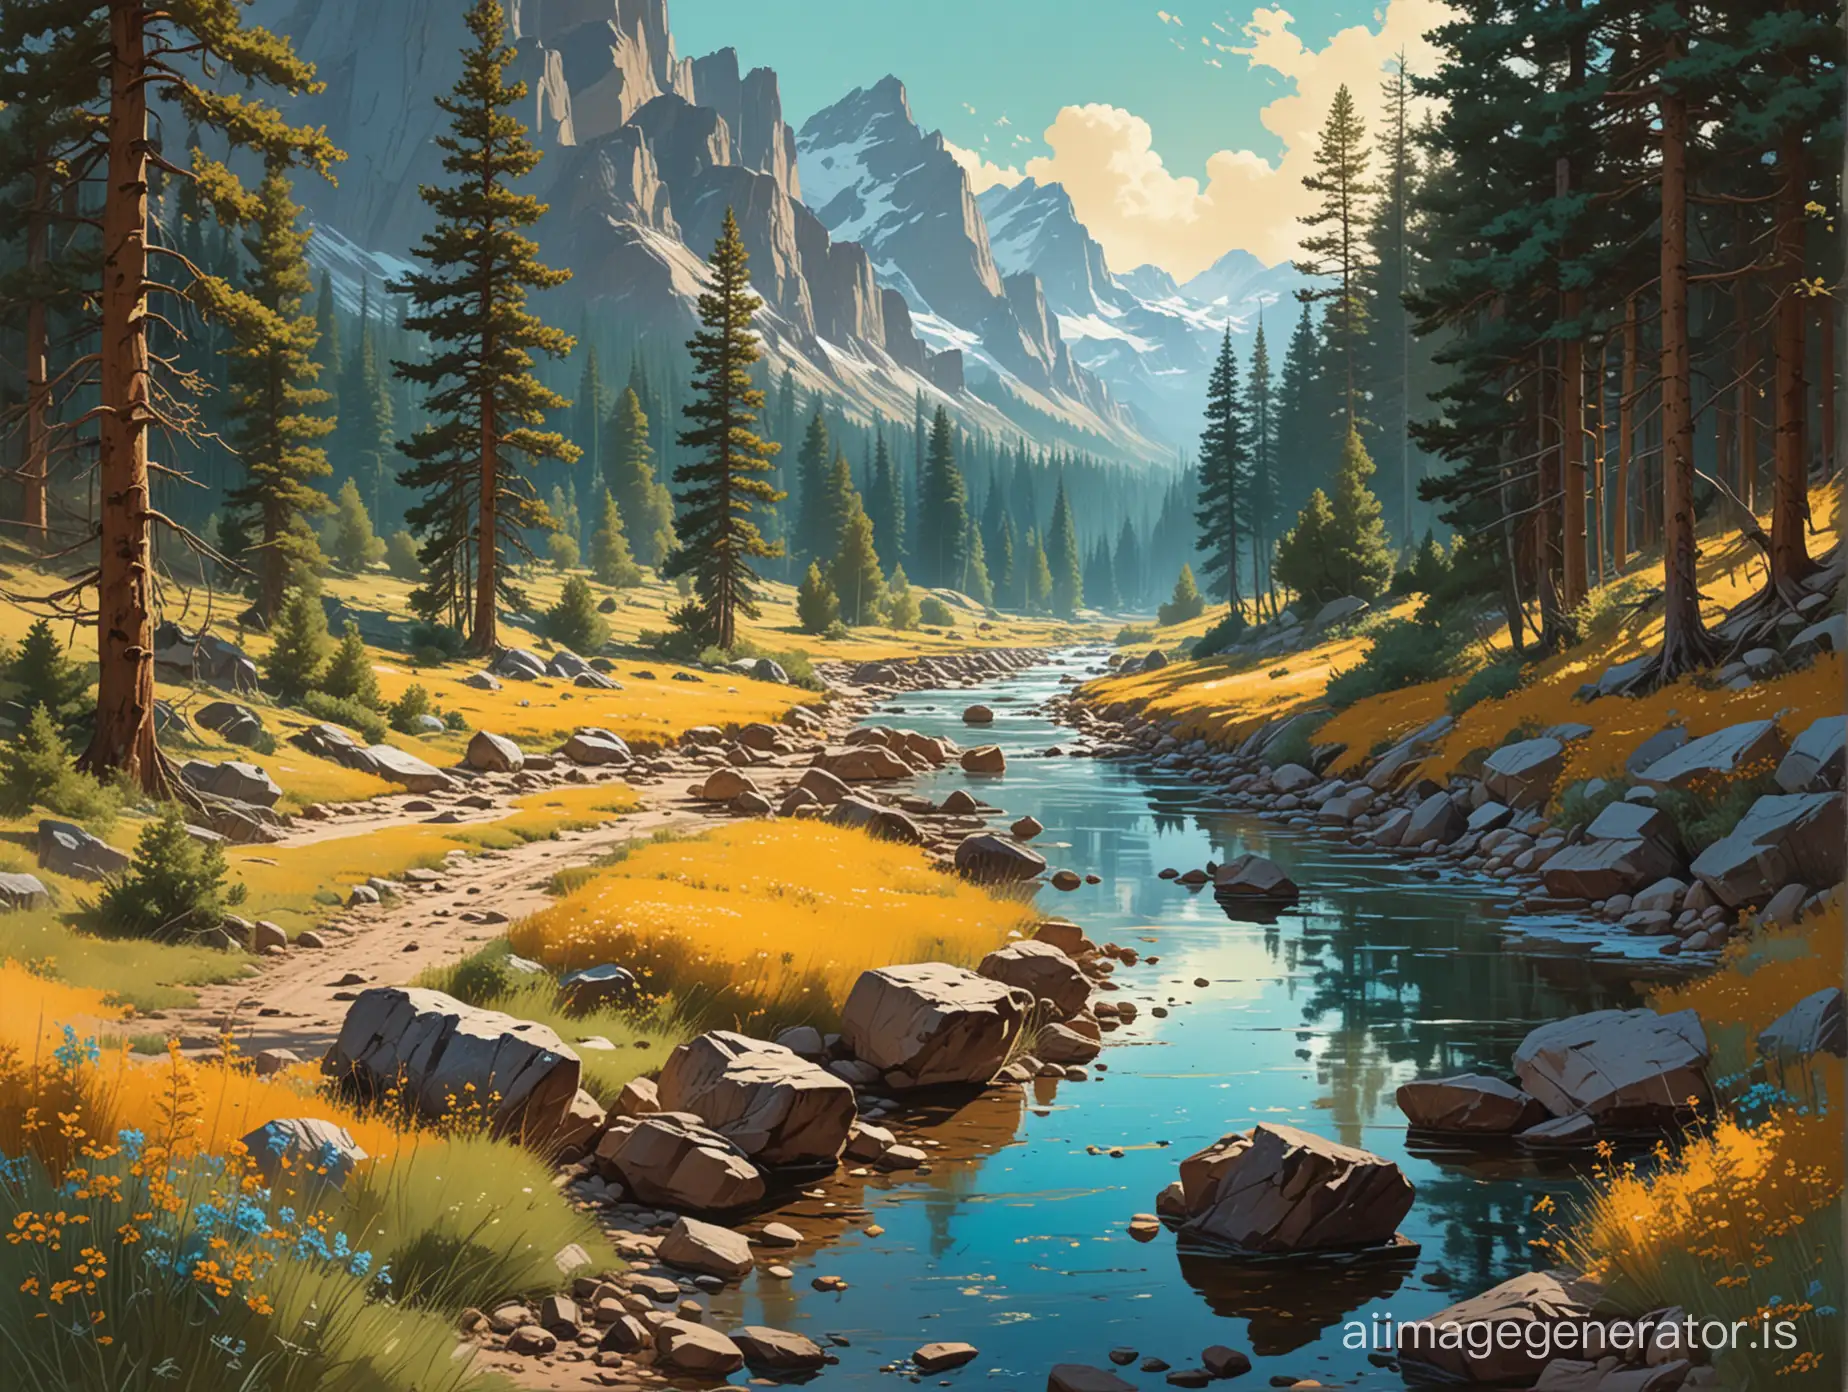 Steve-Daines-Wild-Frontier-Poster-A-Fusion-of-Contemporary-and-Arcadian-Landscapes